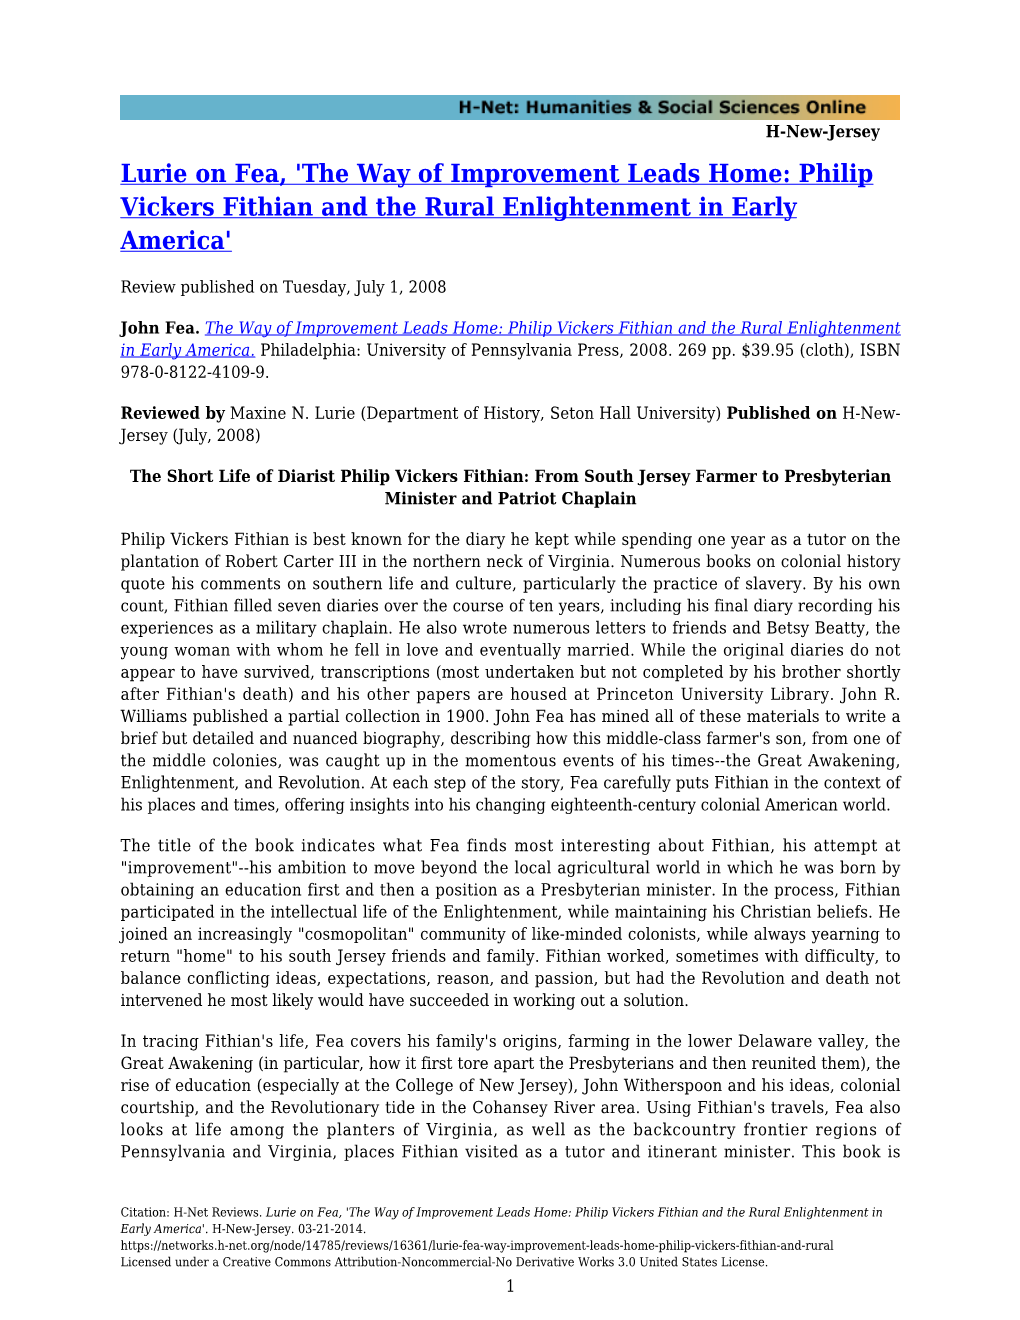 Lurie on Fea, 'The Way of Improvement Leads Home: Philip Vickers Fithian and the Rural Enlightenment in Early America'